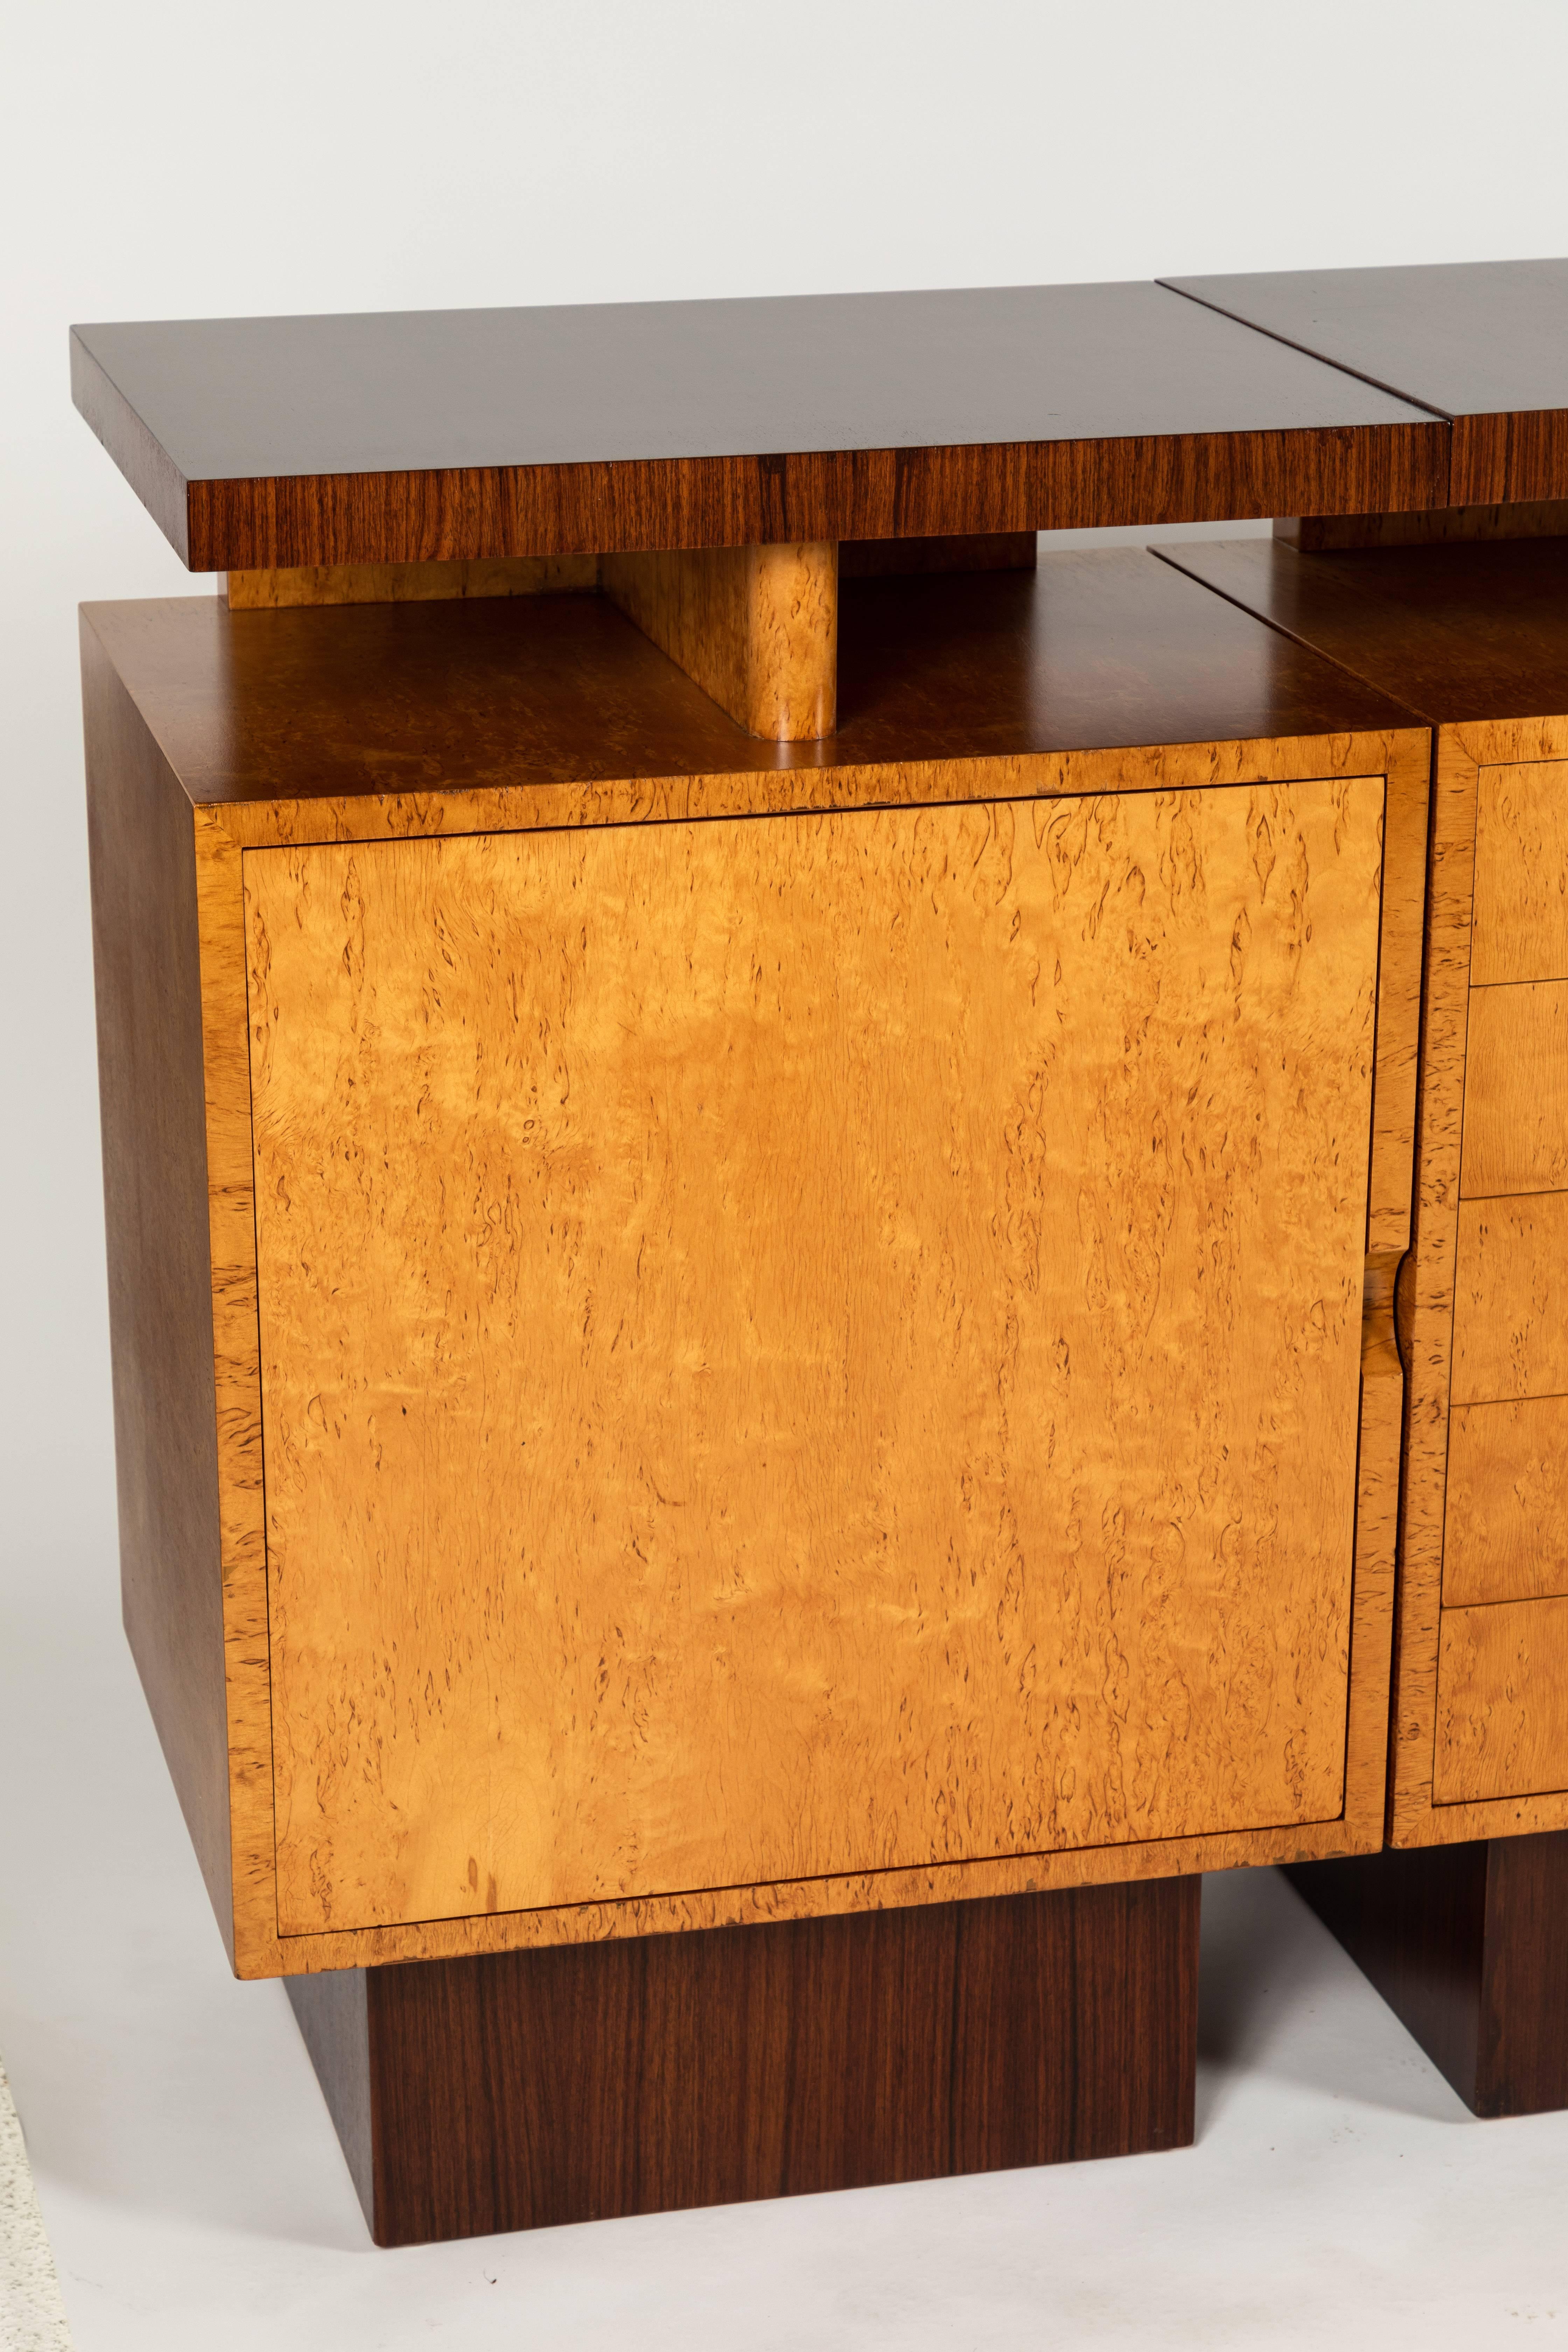 A fine three-piece, two-tone sideboard by Andrew Szoke that embodies the Mid-Century Modern movement.
Veneered in a combination of bird's-eye maple and Macassar ebony for a high contrast.

The smaller cabinets feature one door concealing three